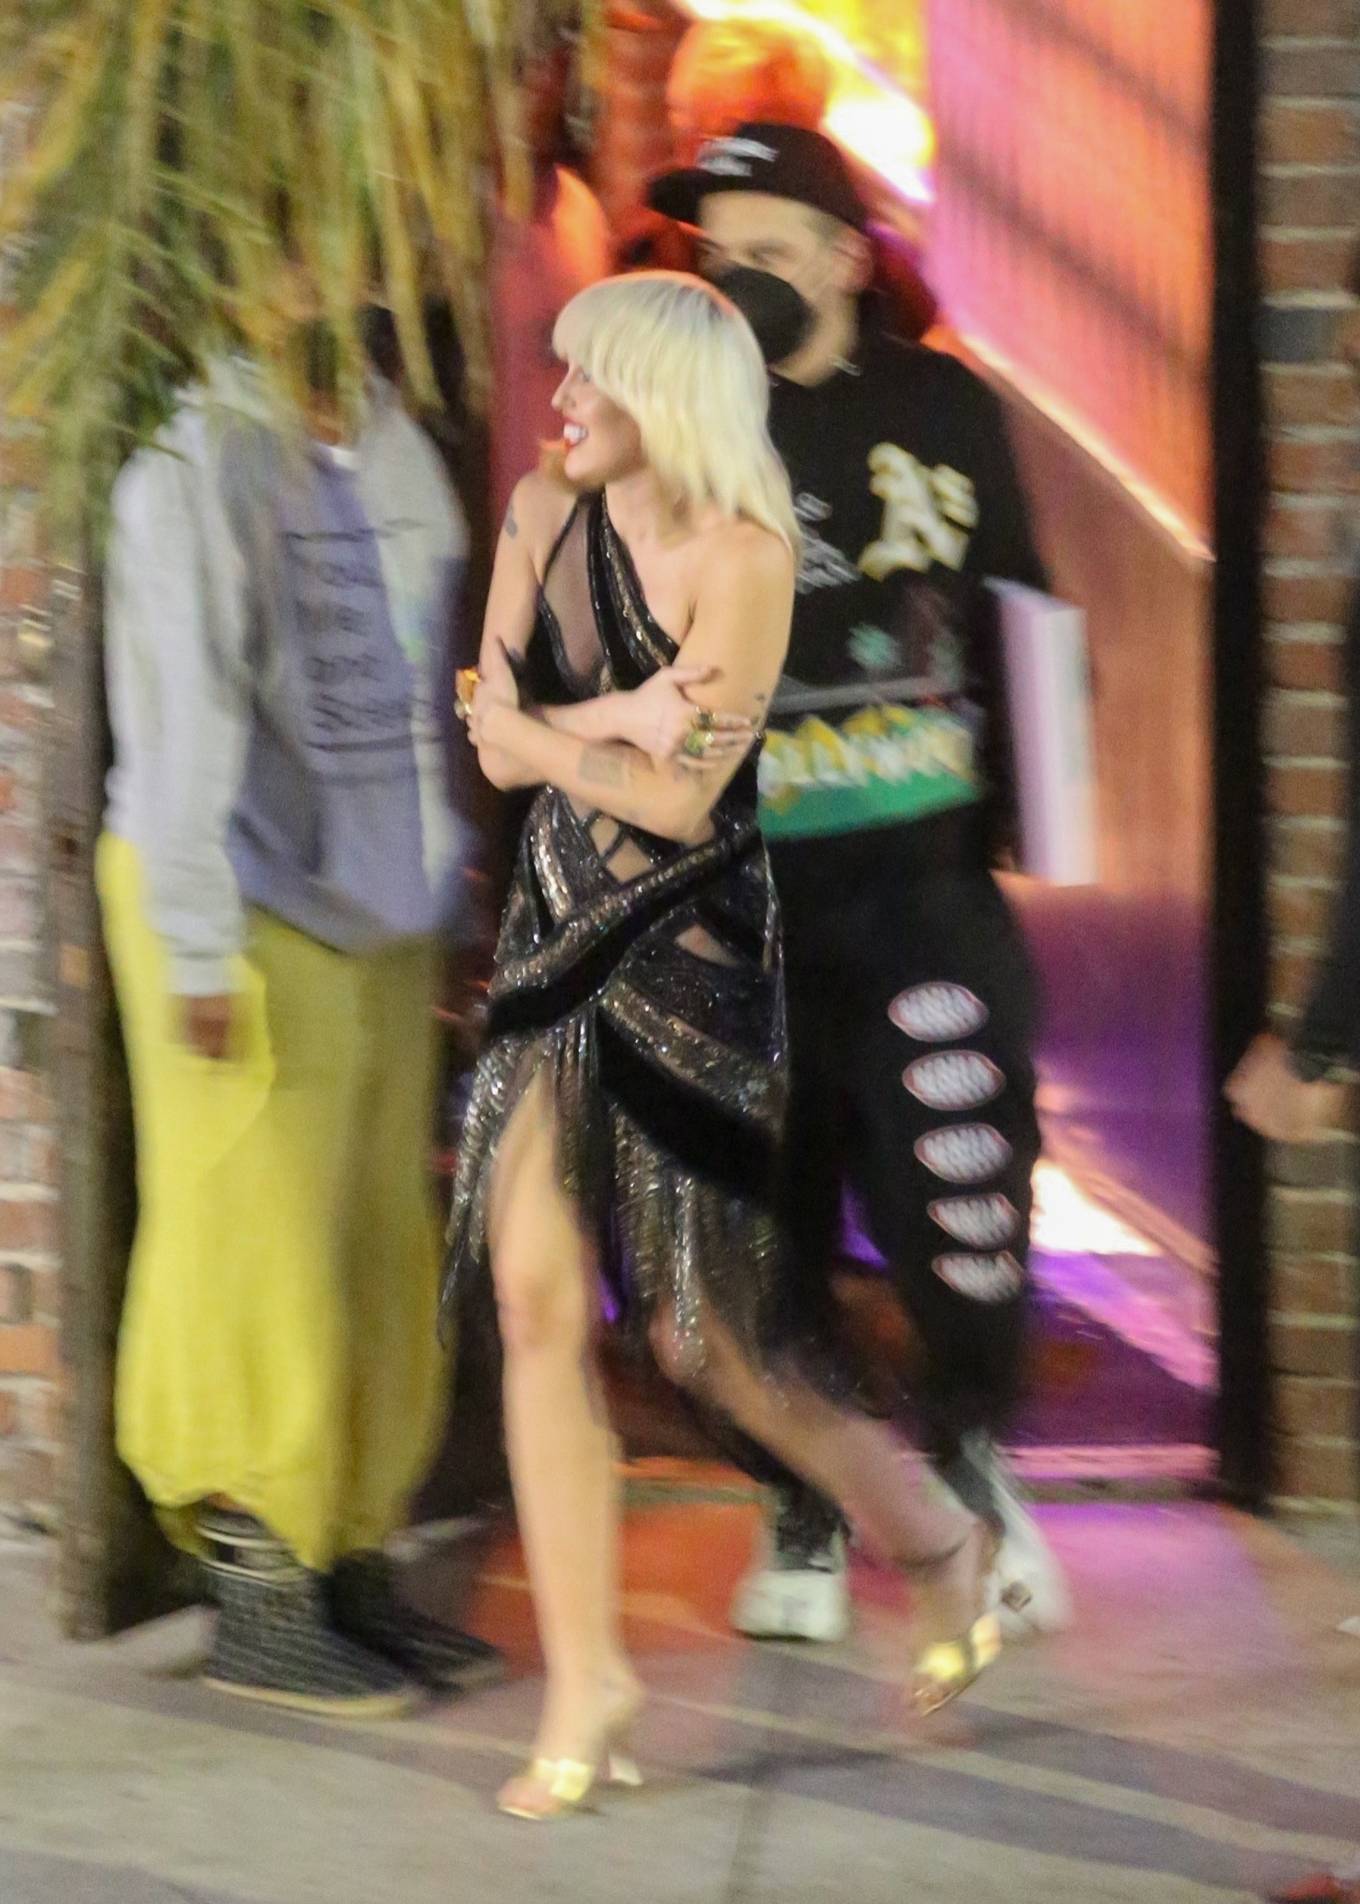 Miley Cyrus - With Pete Davidson filming together in Hollywood